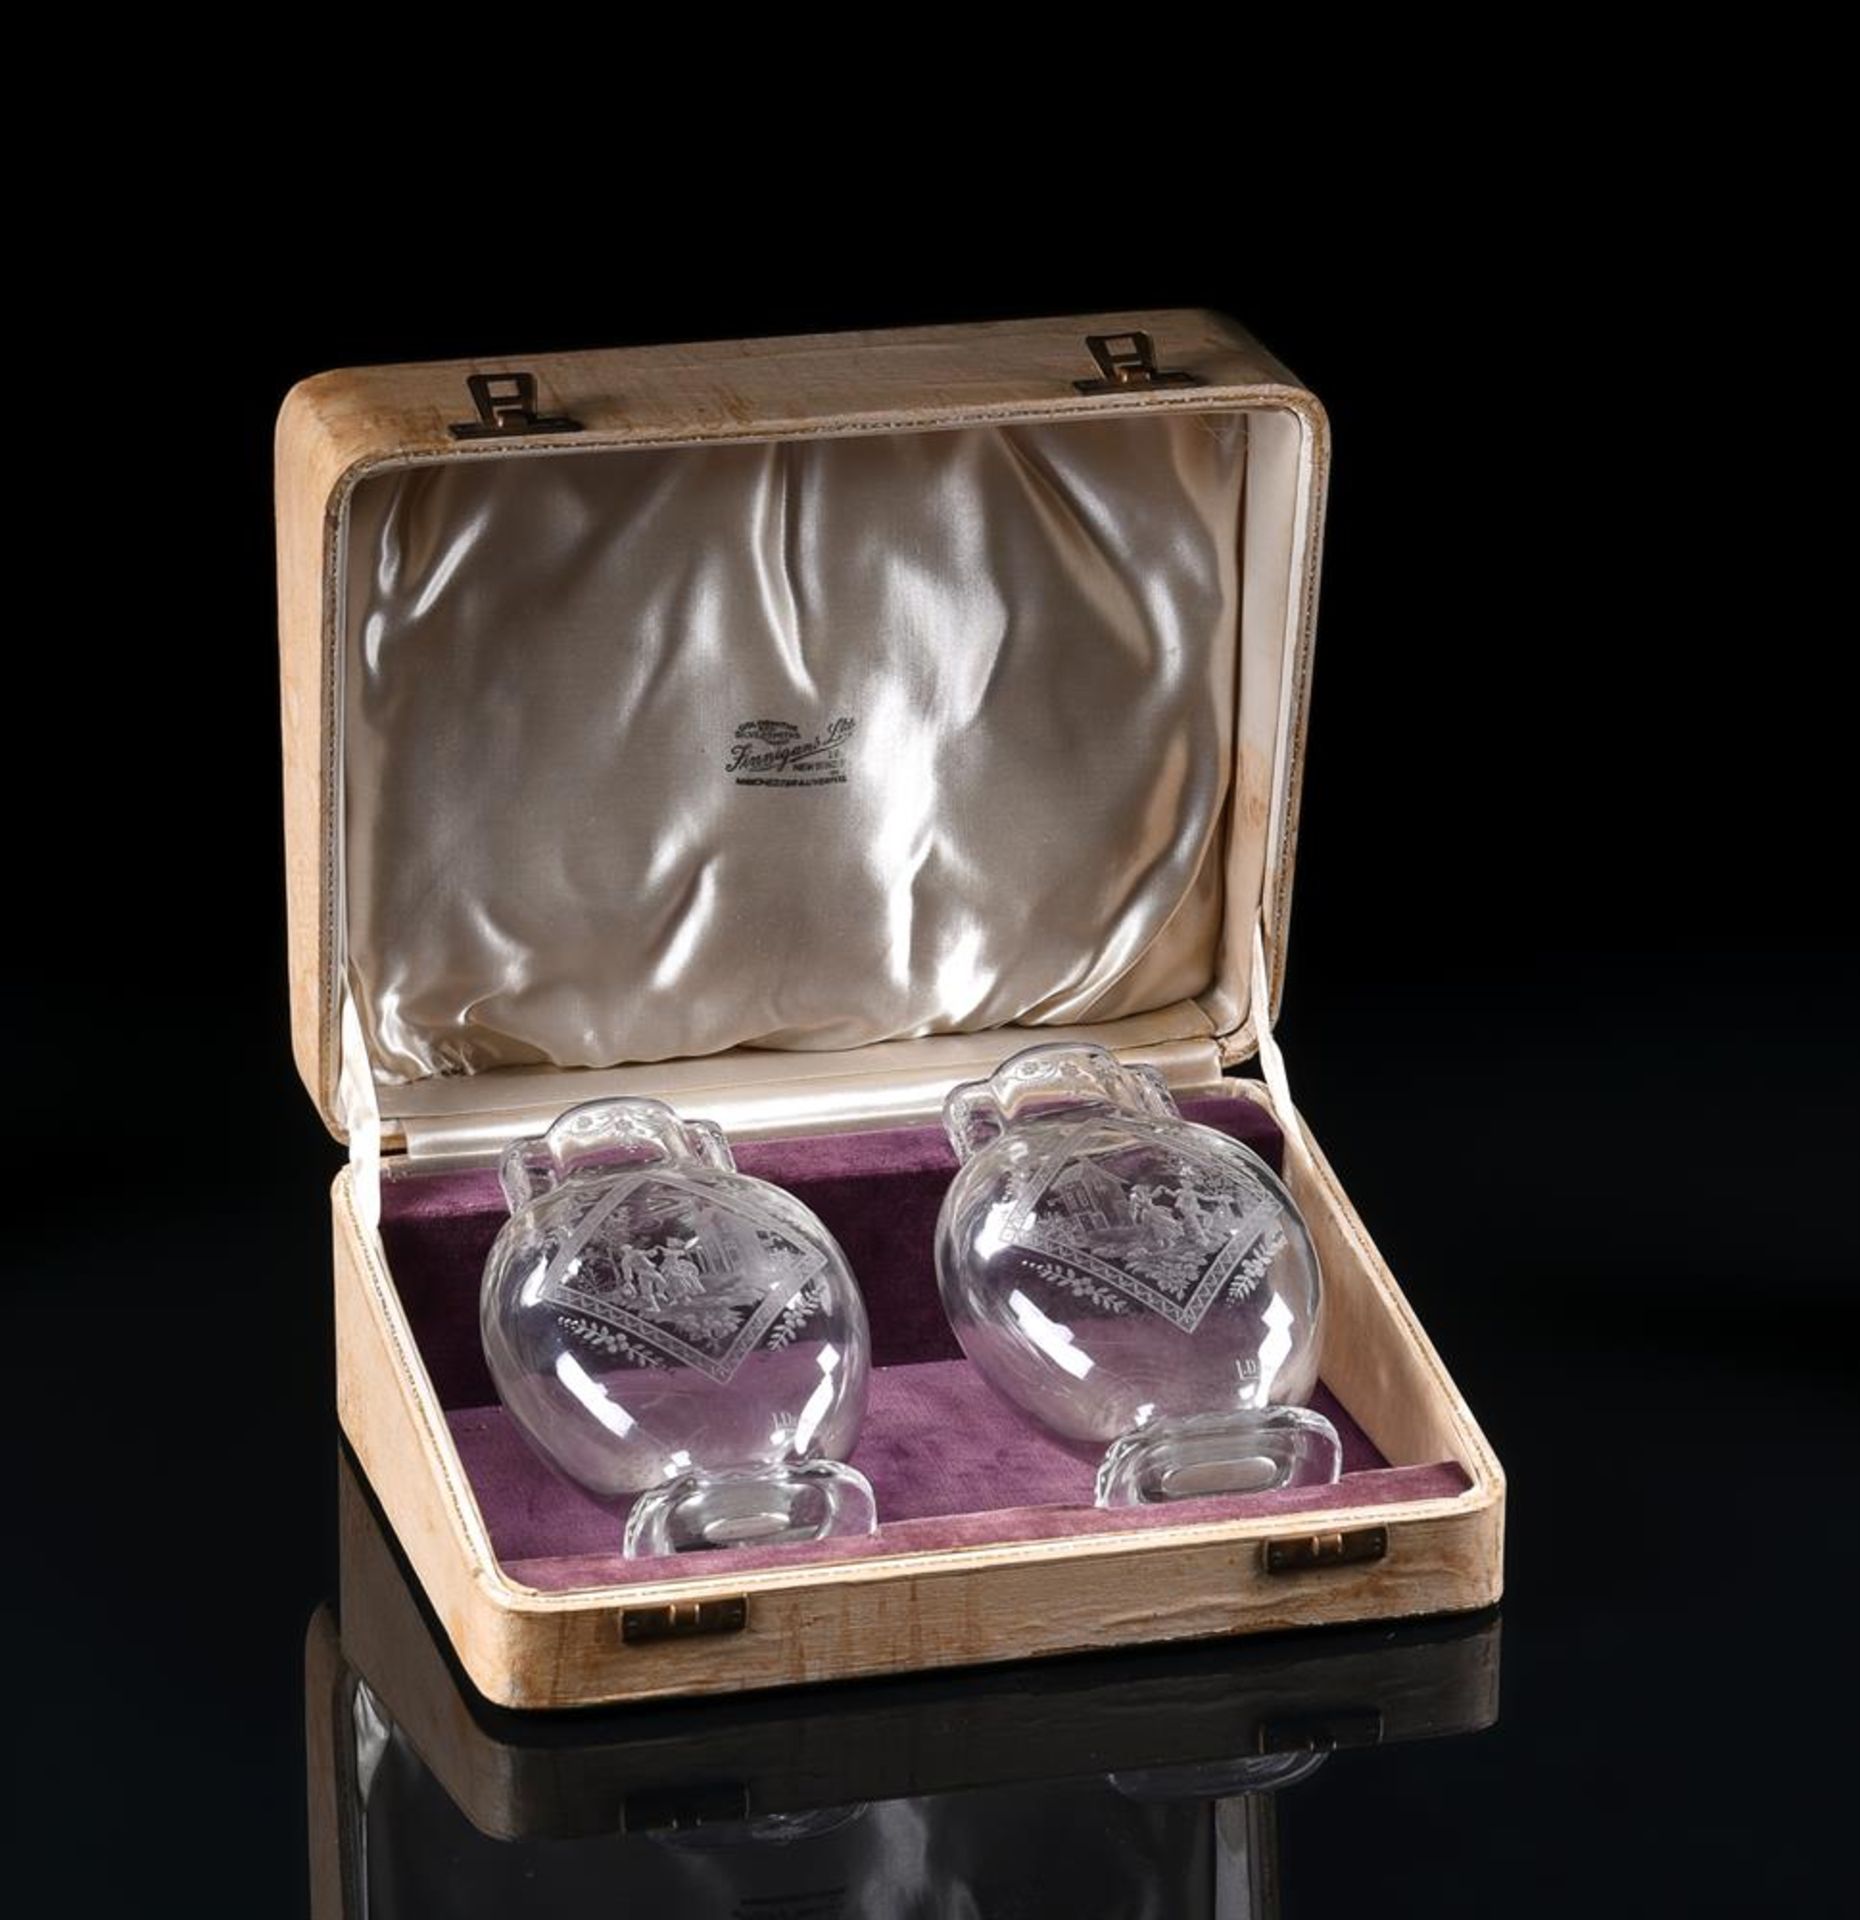 A PAIR OF ROCK-CRYSTAL GLASS VASES MADE FOR THE PARIS RETAILER GEORGES ROUARD - Image 2 of 2